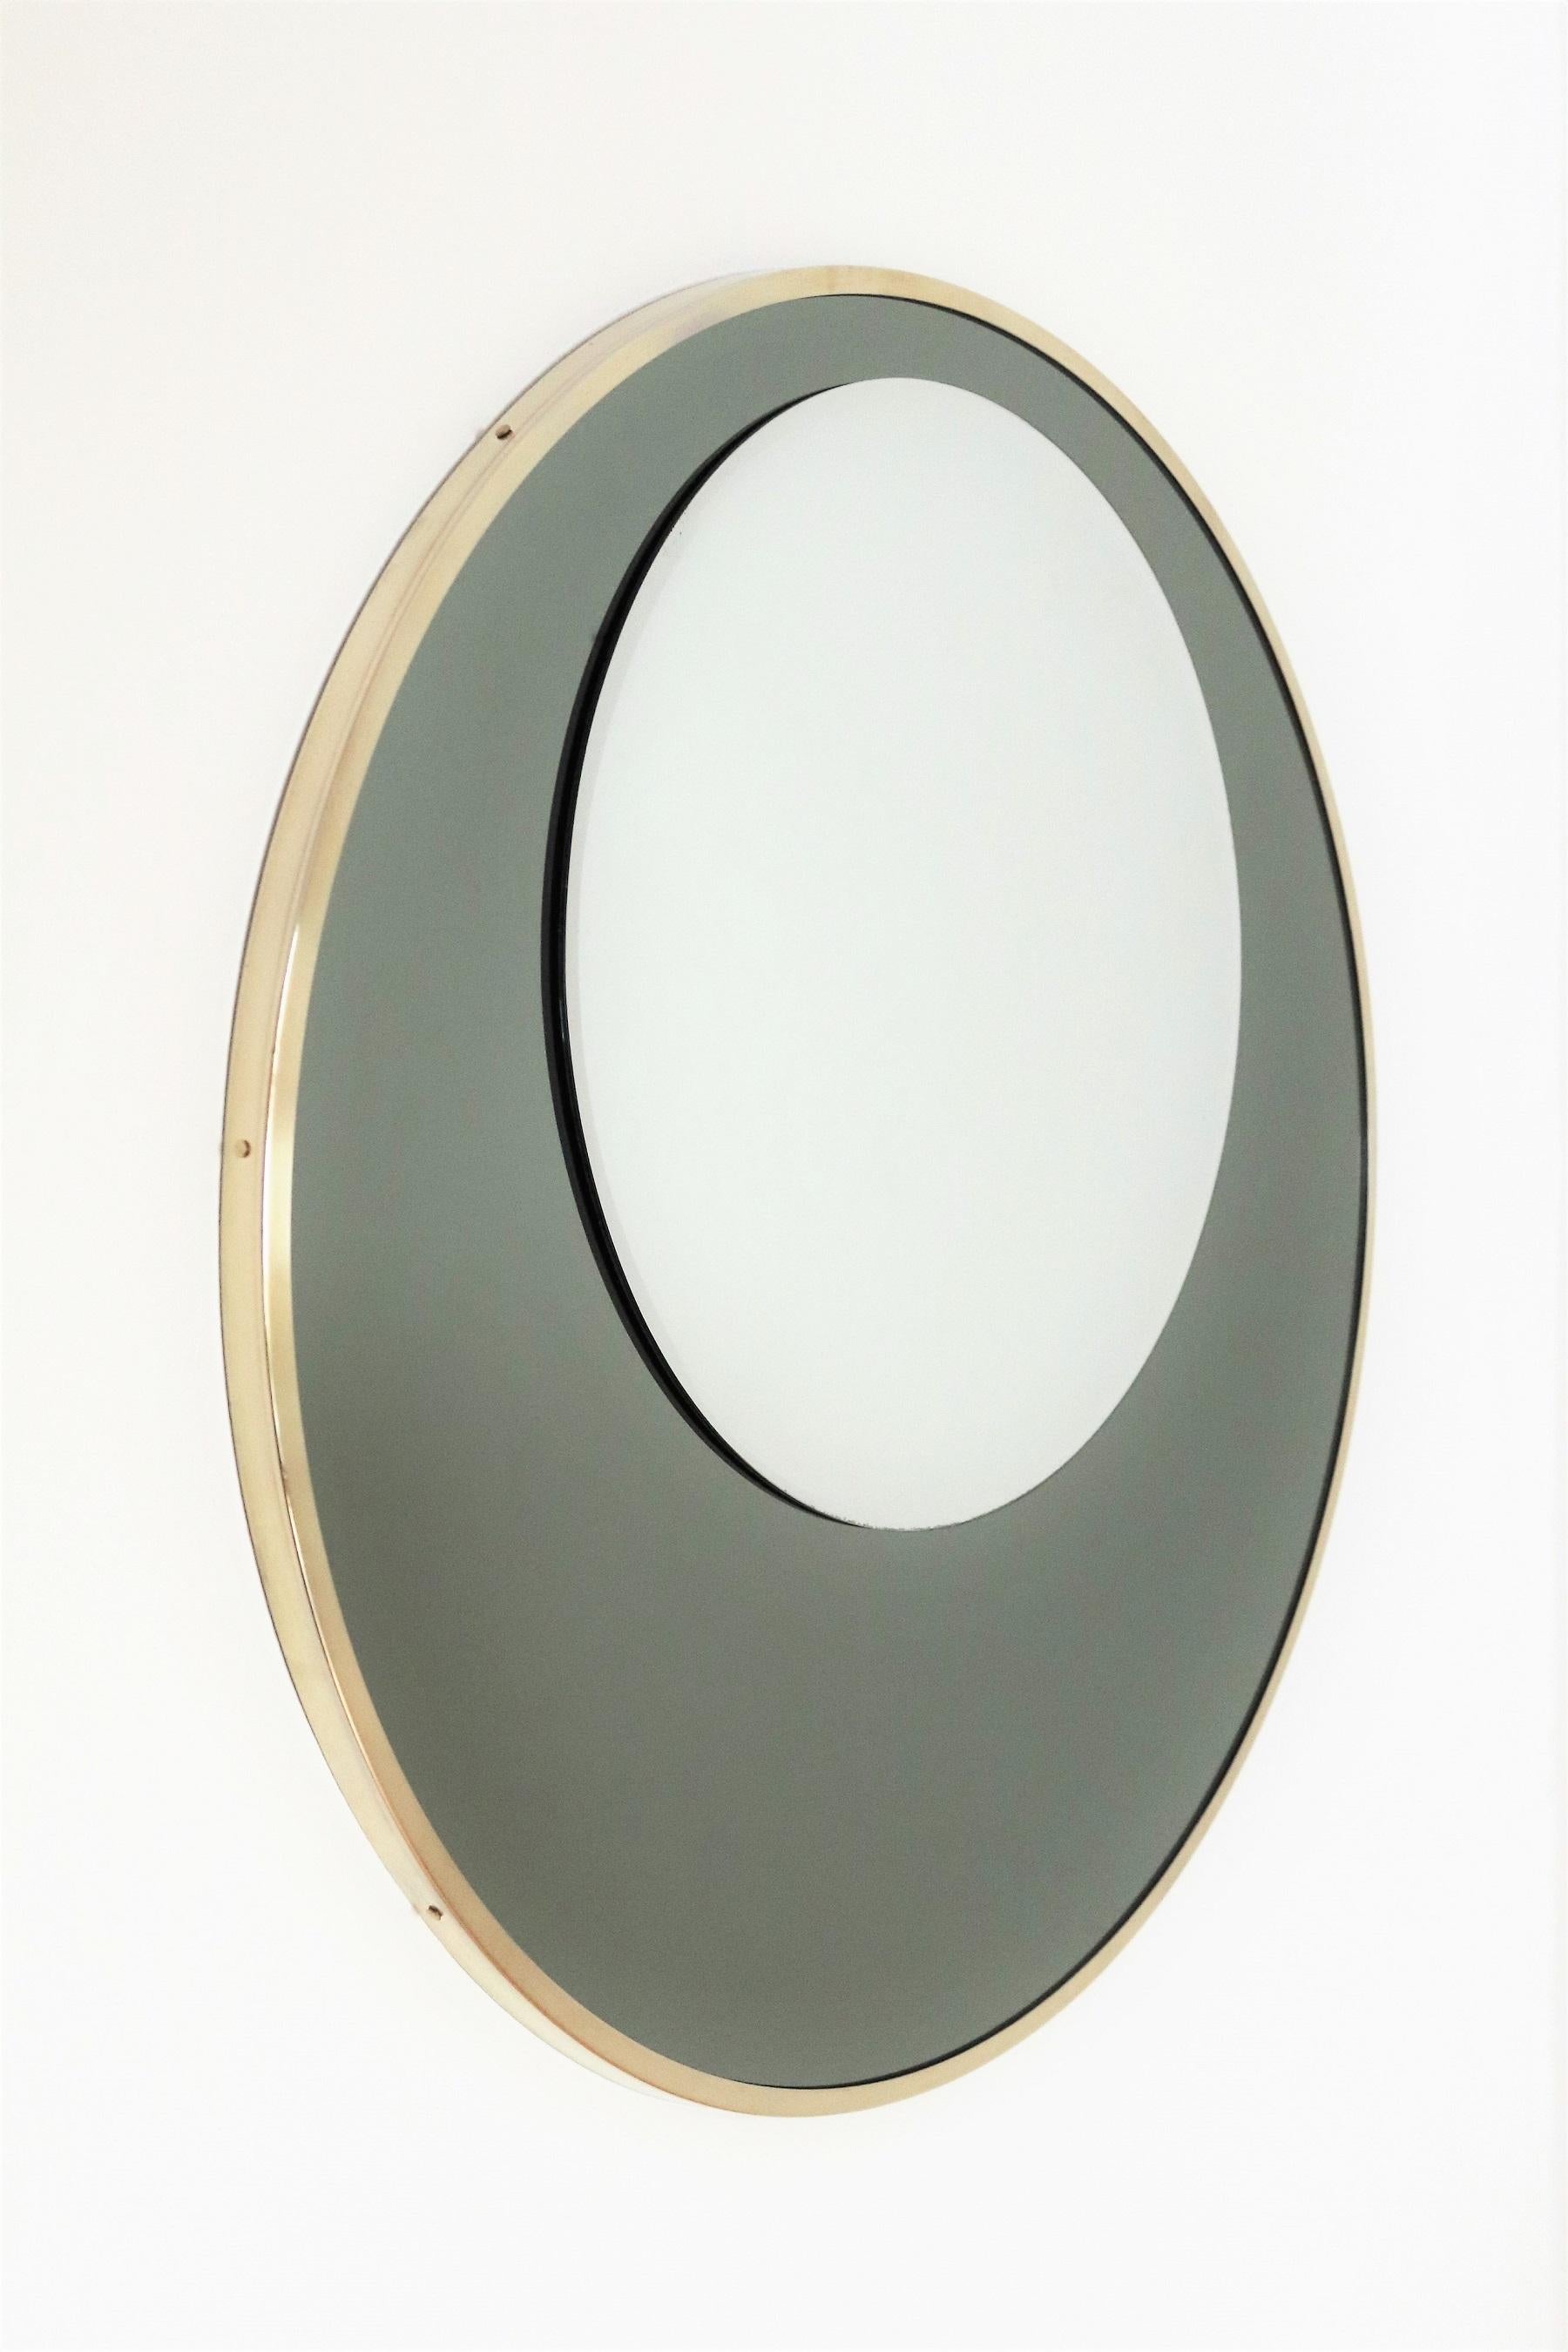 Italian Round Wall Mirror with Double Glass and Brass Frame 1970s For Sale 12